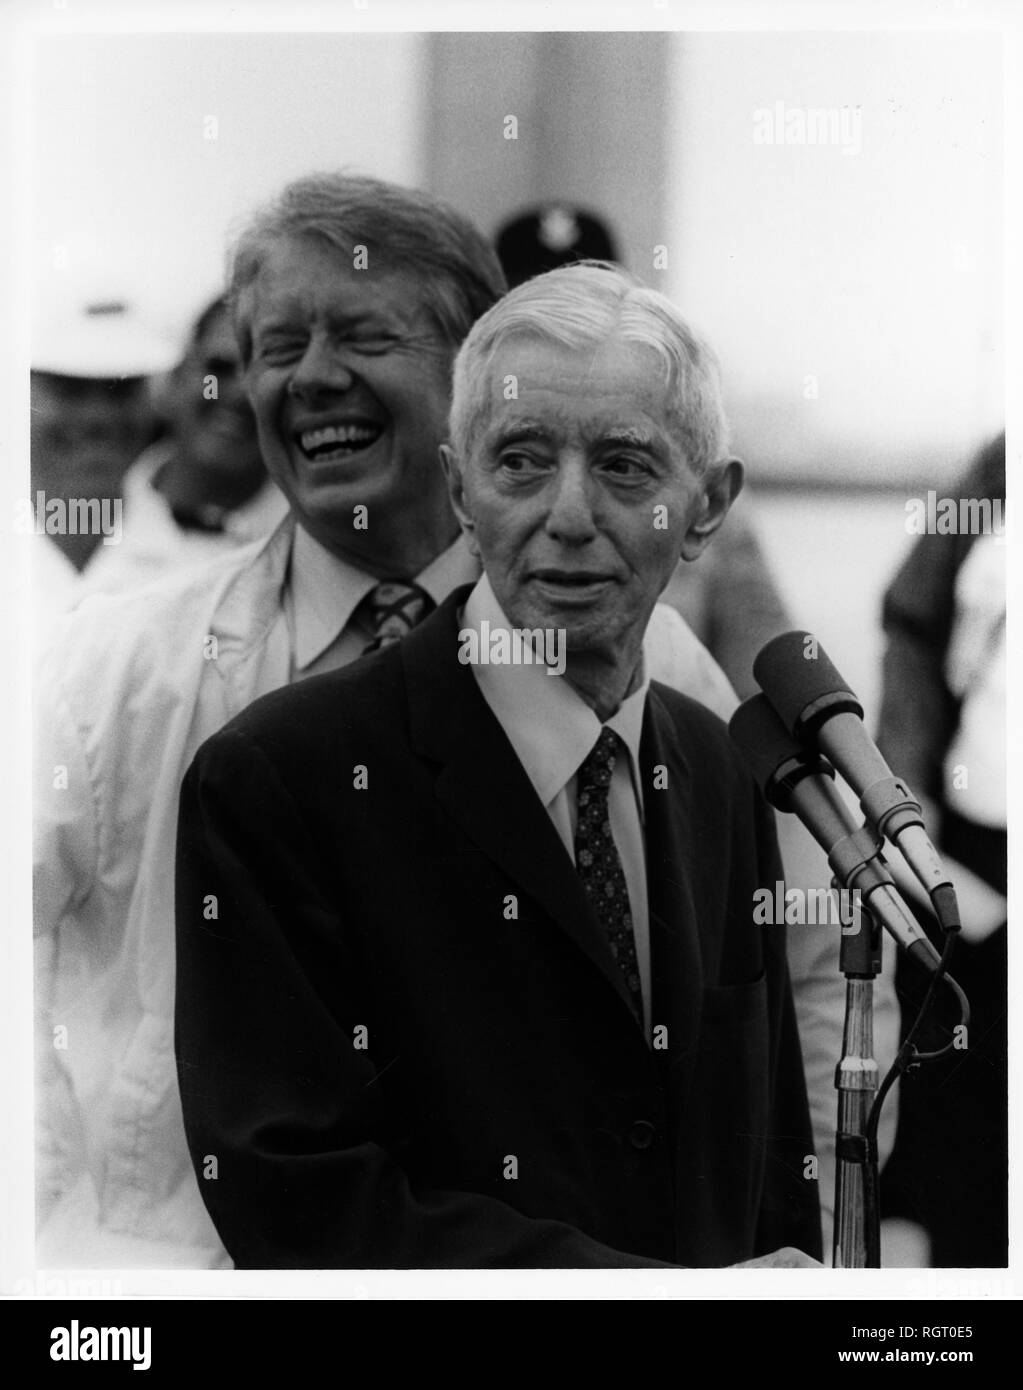 CAPE CANAVERAL, Fla. (May 27, 1977) Adm. Hyman G. Rickover, Retired, Director, Division of Naval Reactors, U.S. Energy Research and Development Administration and Deputy Commander for Nuclear Propulsion, speaks to the group gathered at the nuclear powered submarine USS Los Angeles (SSN 688). His answer to a question brings a laugh from President Jimmy Carter and the gathered crowd. (U.S. Navy photo by Photographer’s Mate 2nd Class Dave Longstreath/Released) Stock Photo